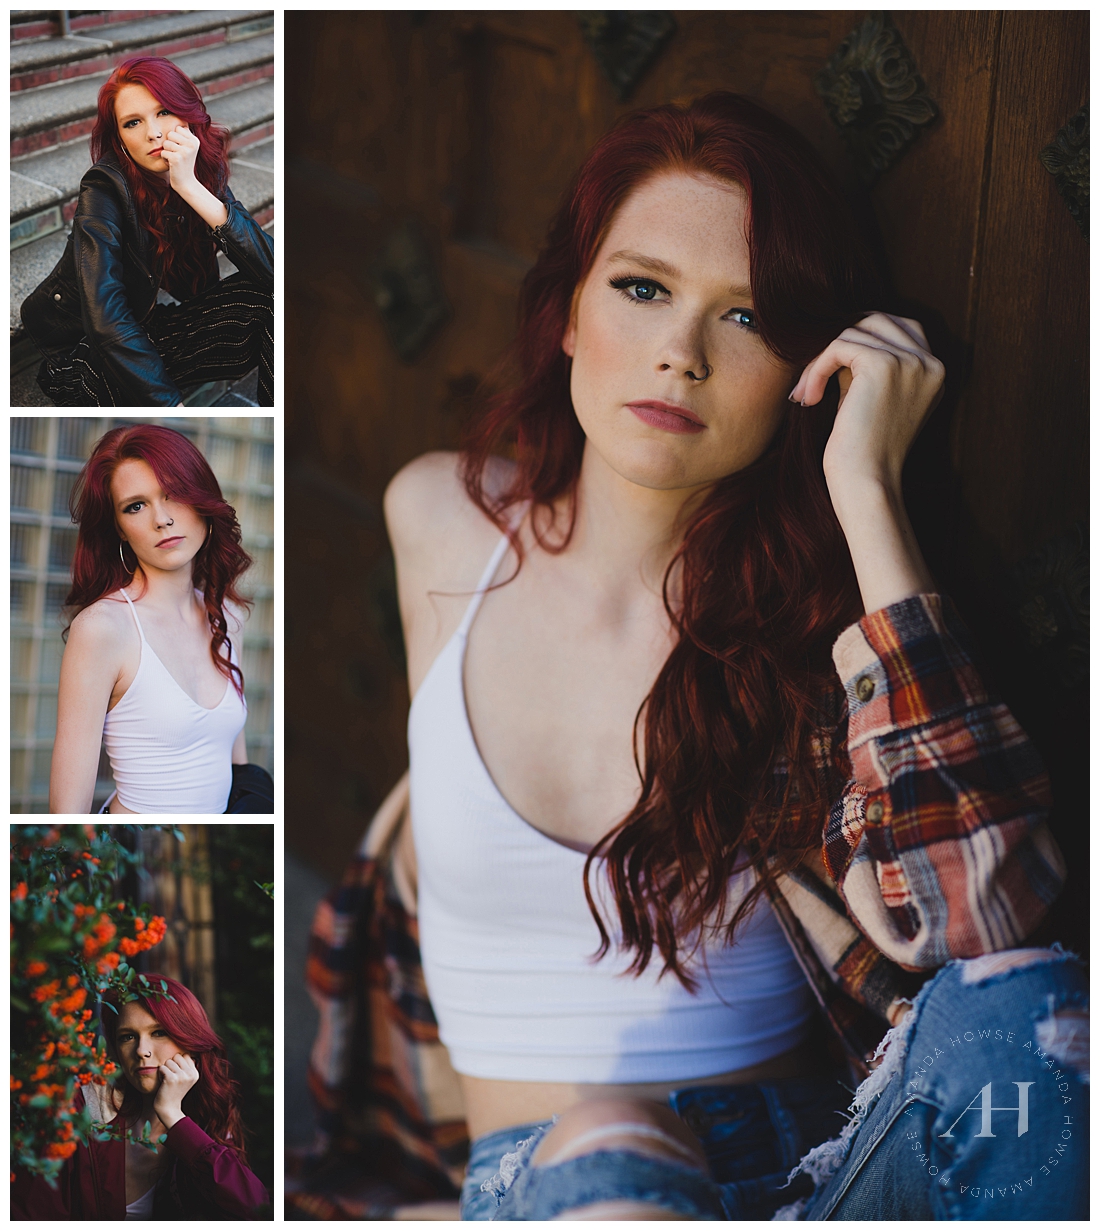 How to Style a Flannel and Crop Top | Seattle Grunge Inspired Senior Portraits | Photographed by Tacoma's Best Senior Portrait Photographer Amanda Howse